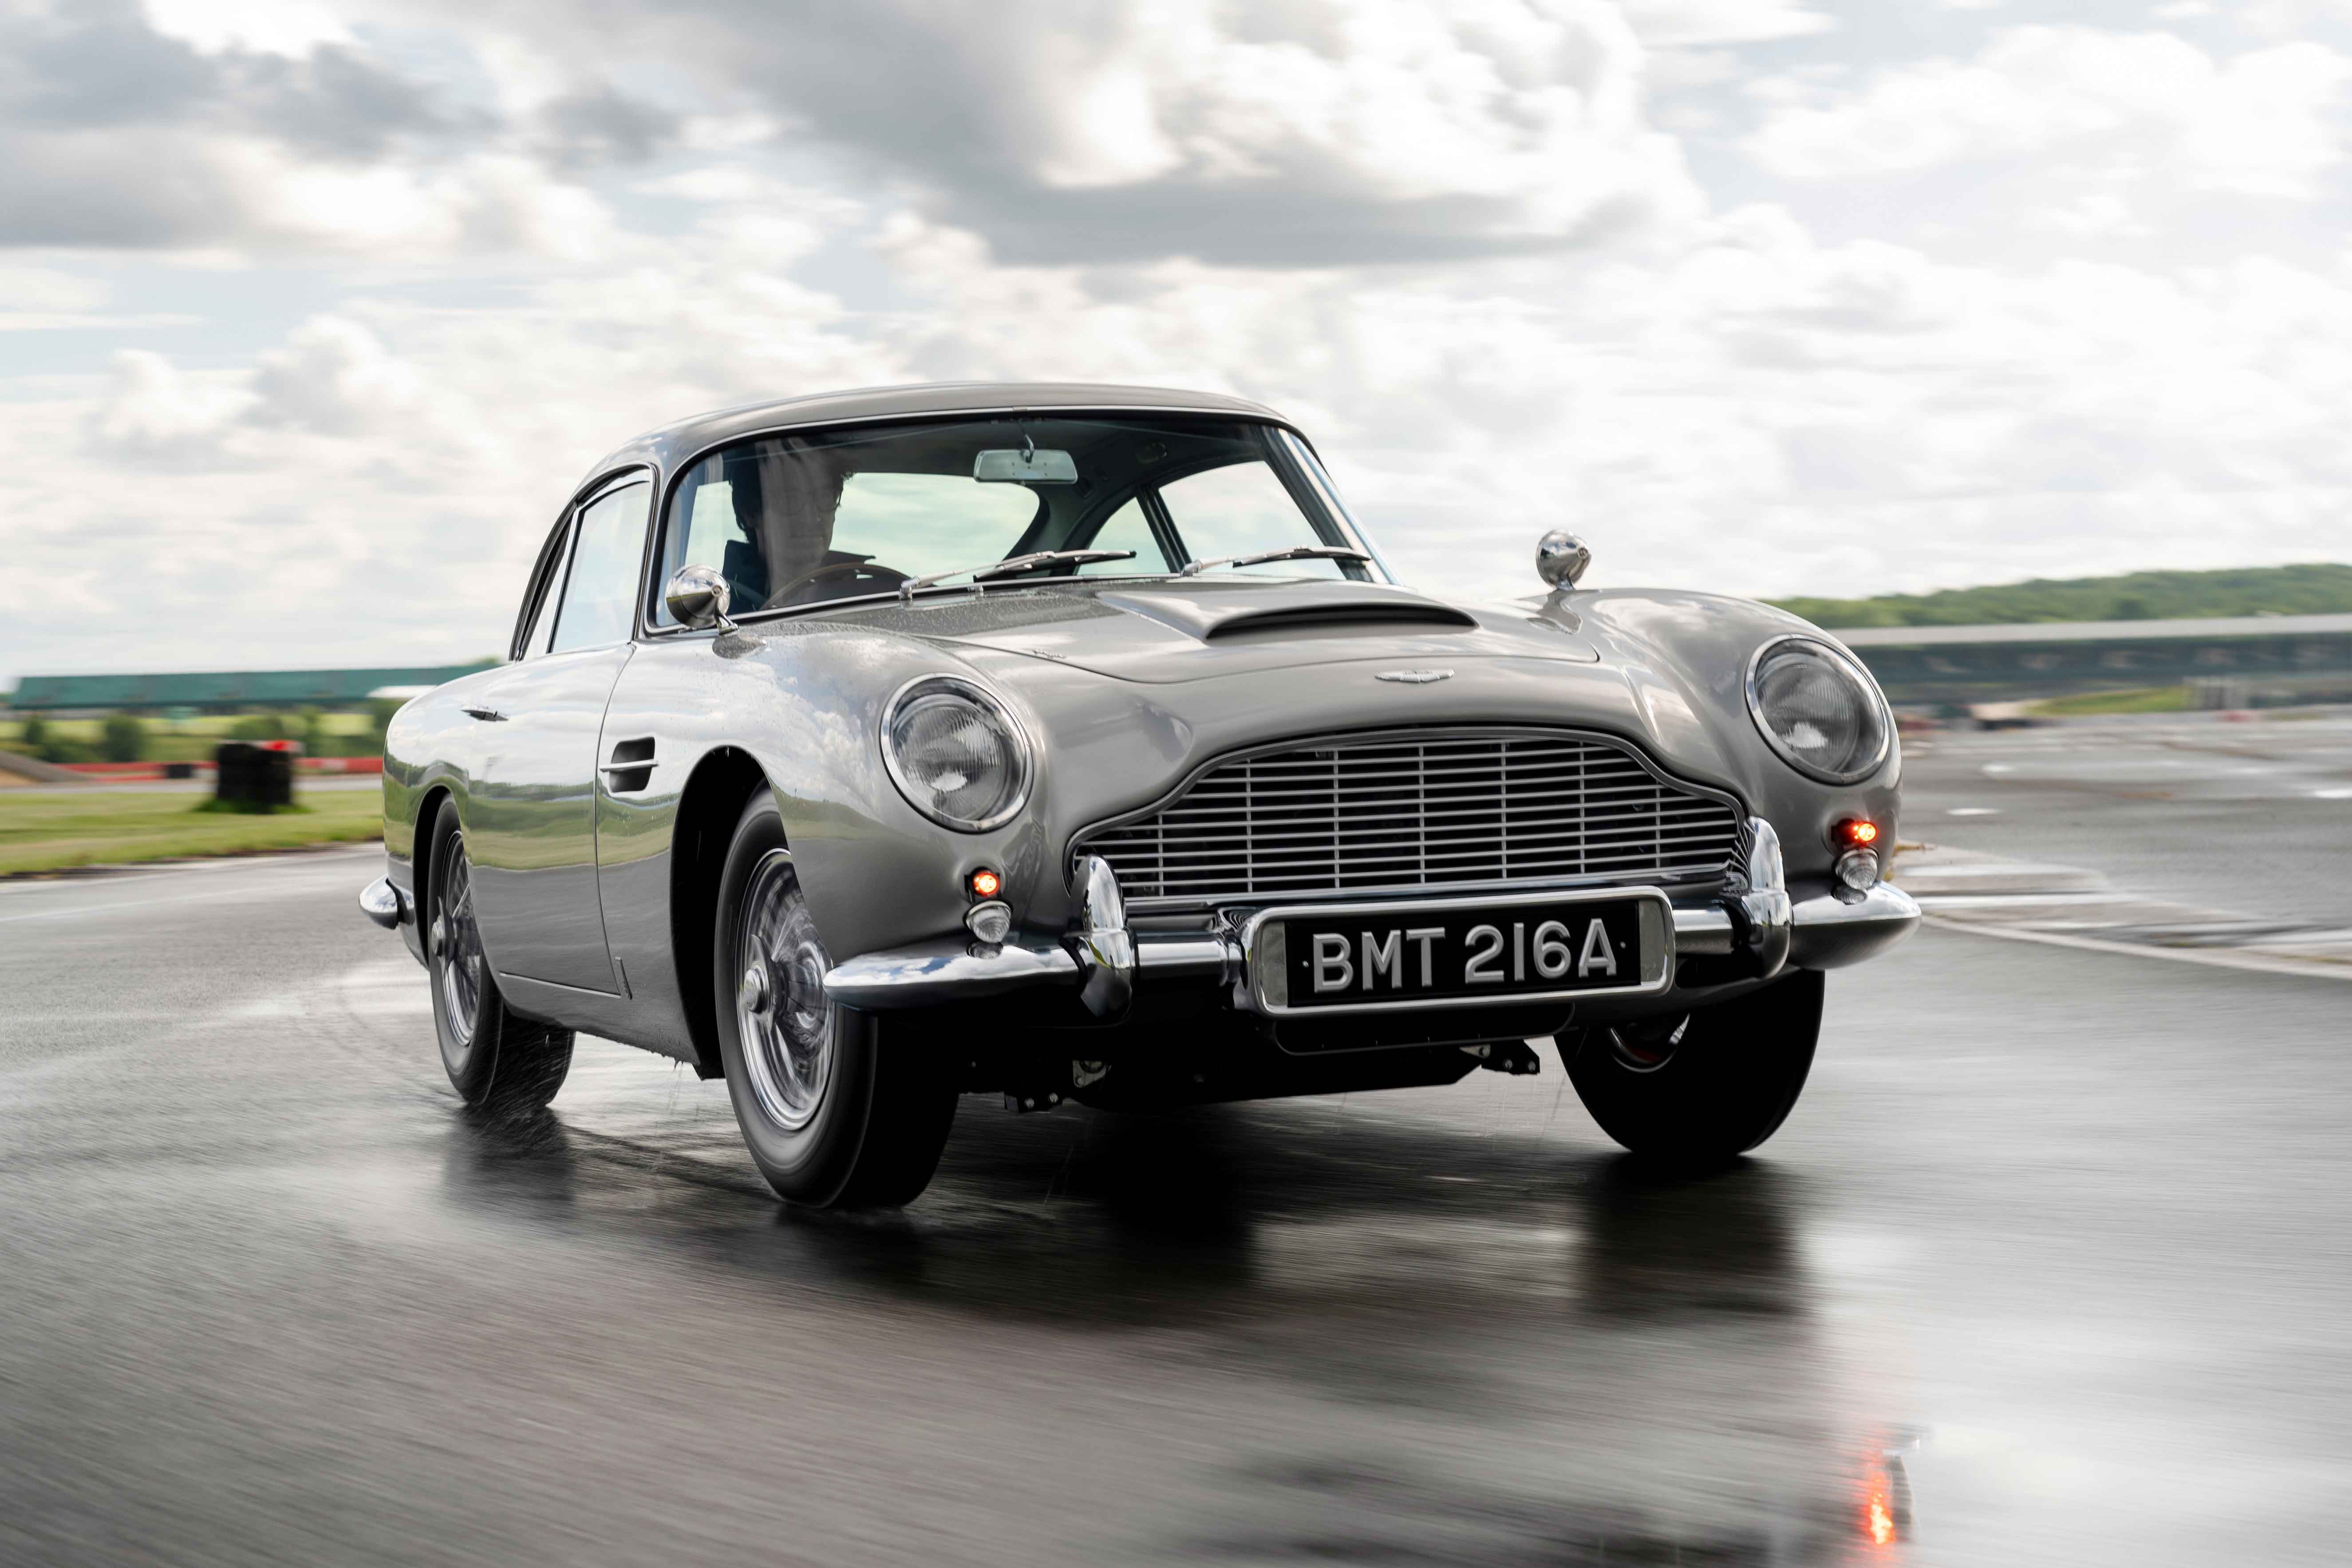 The first new DB5 in more than 50 years rolls off the line as inaugural Aston Martin DB5 Goldfinger Continuation car is completed